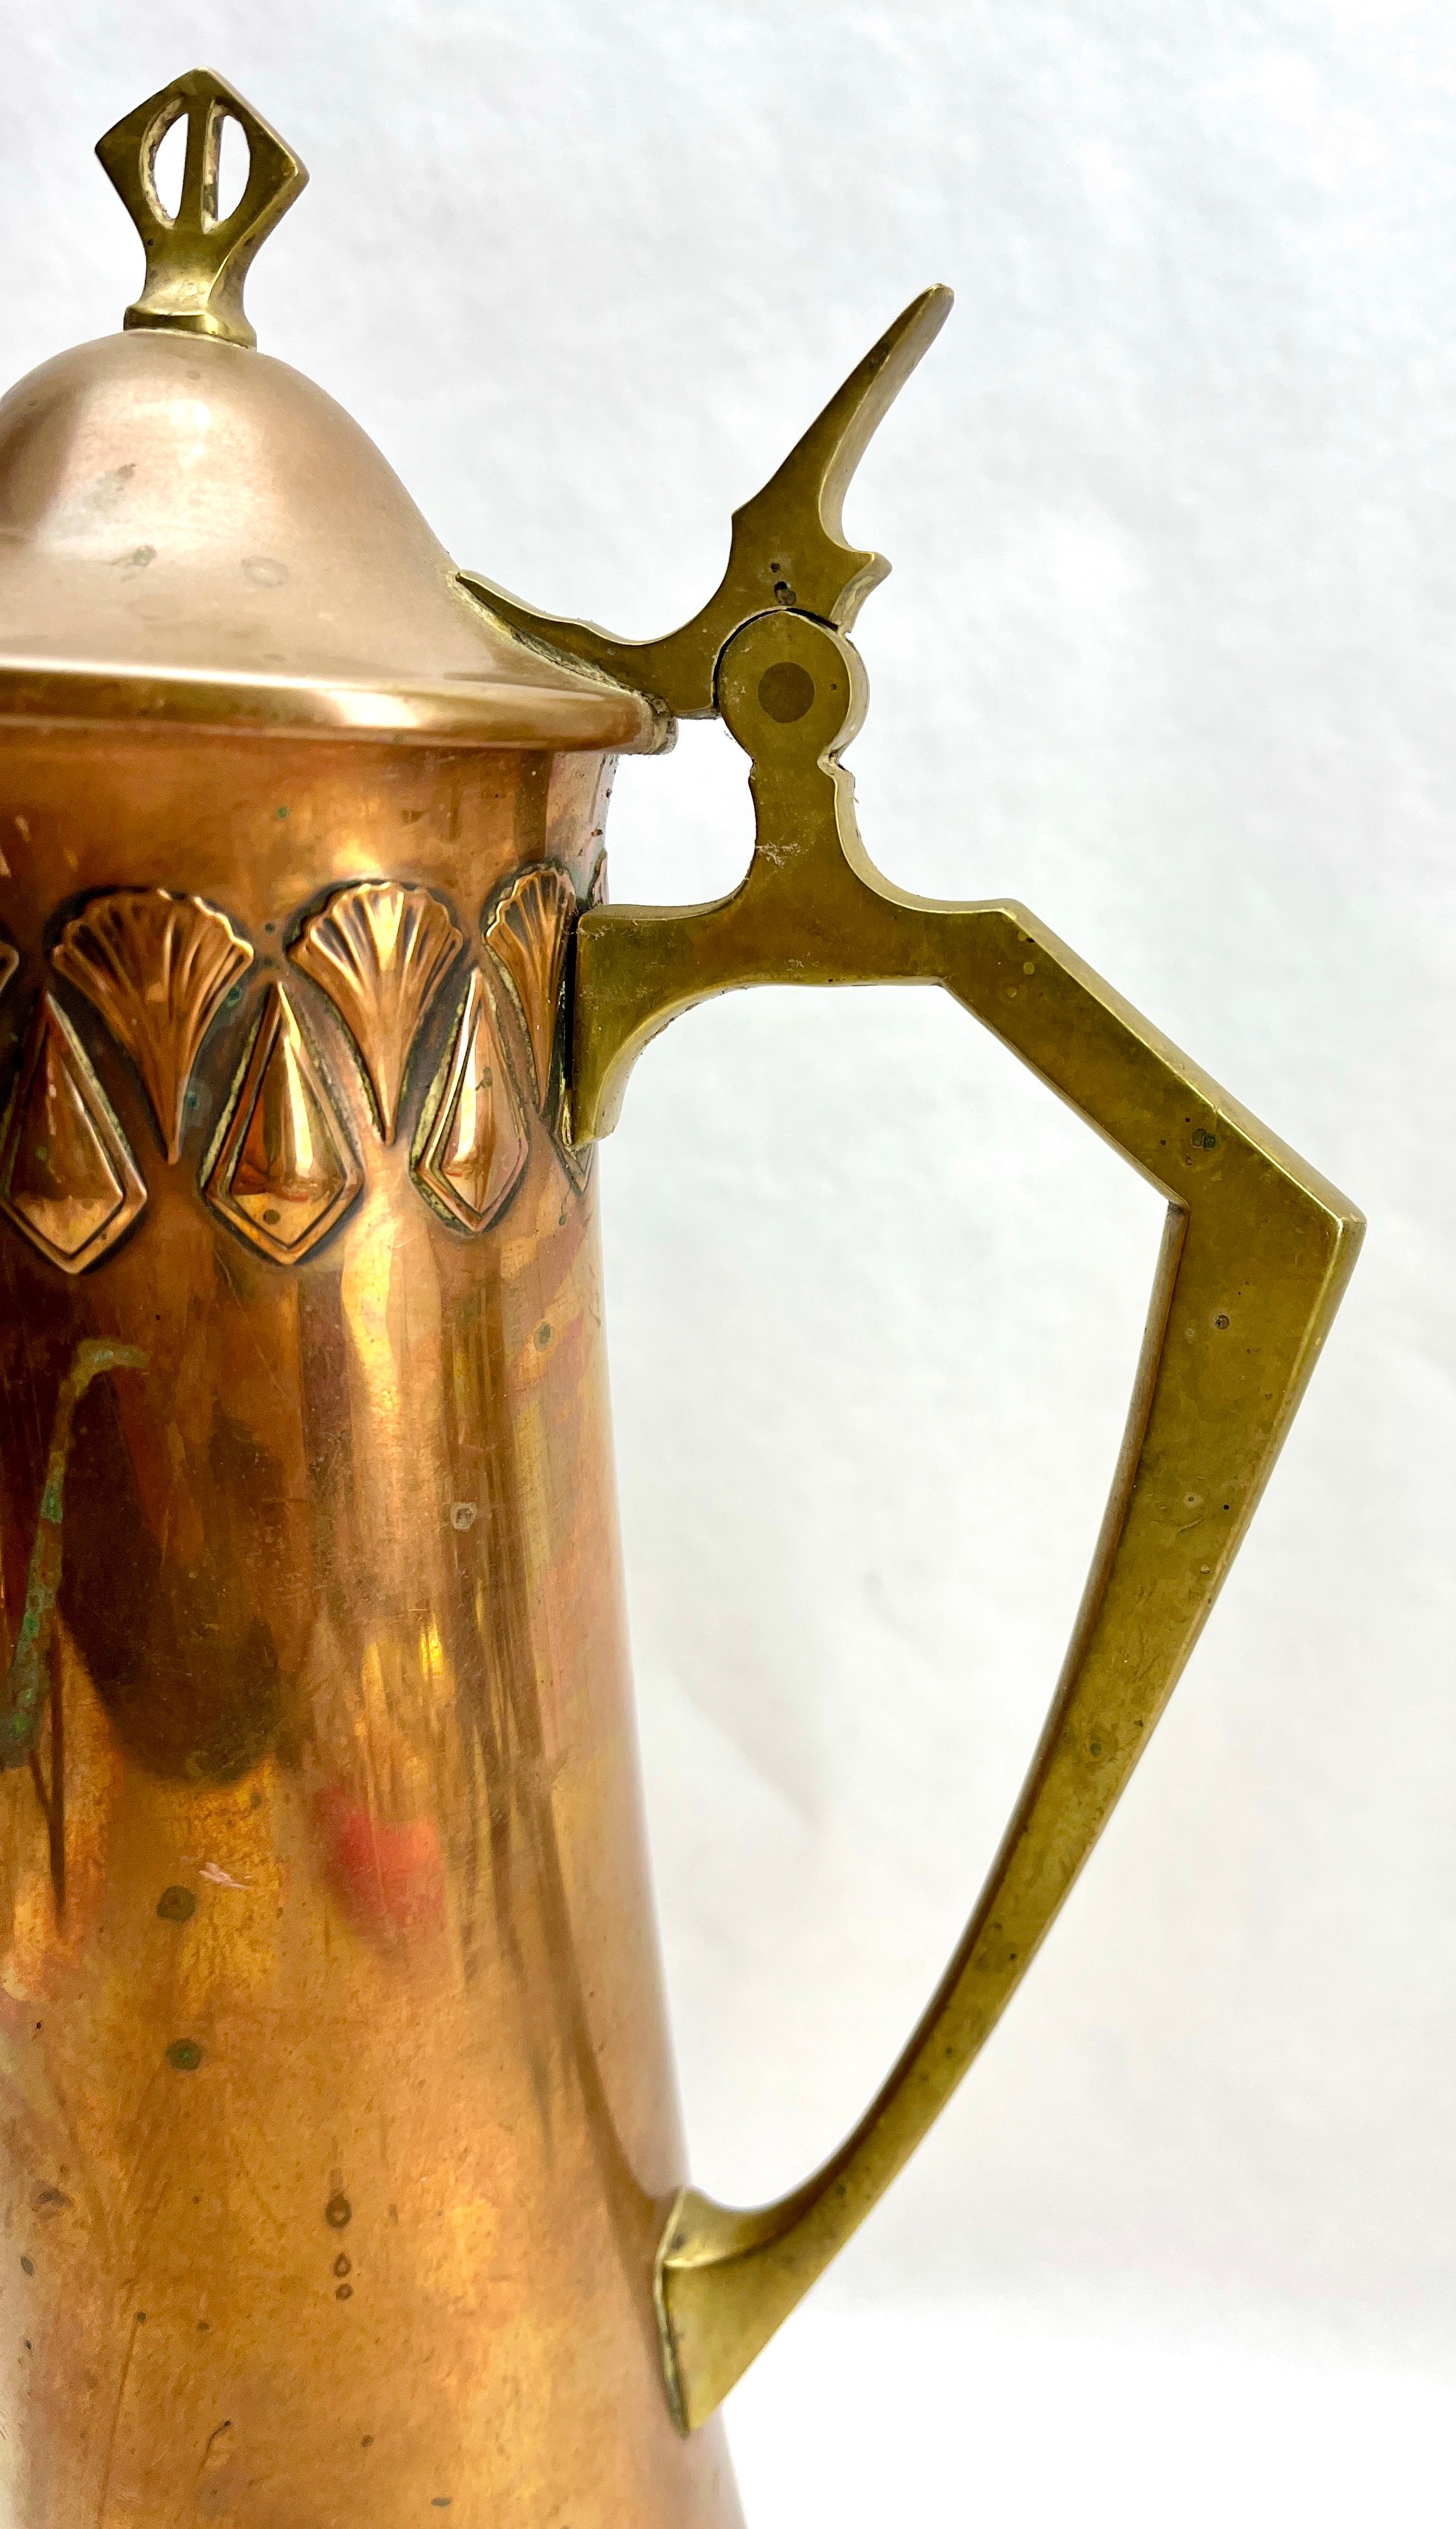 German Art Nouveau Signed WMF Pitcher Brass and Copper  with Handle and Organic Details For Sale